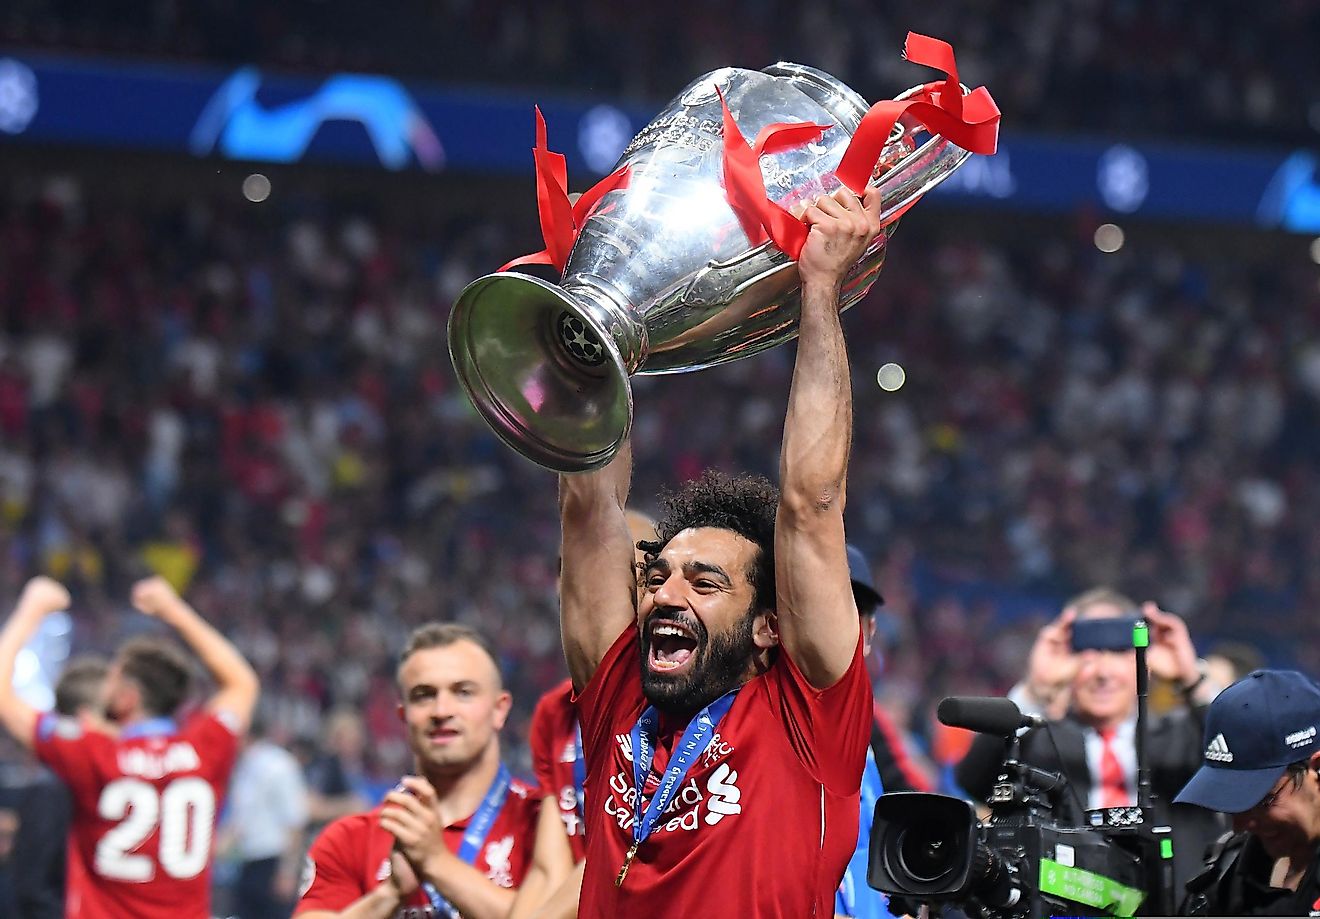 Mohamed Salah of Liverpool pictured during the award ceremony held after the 2018/19 UEFA Champions League Final. Credit: Picstaff / Shutterstock.com